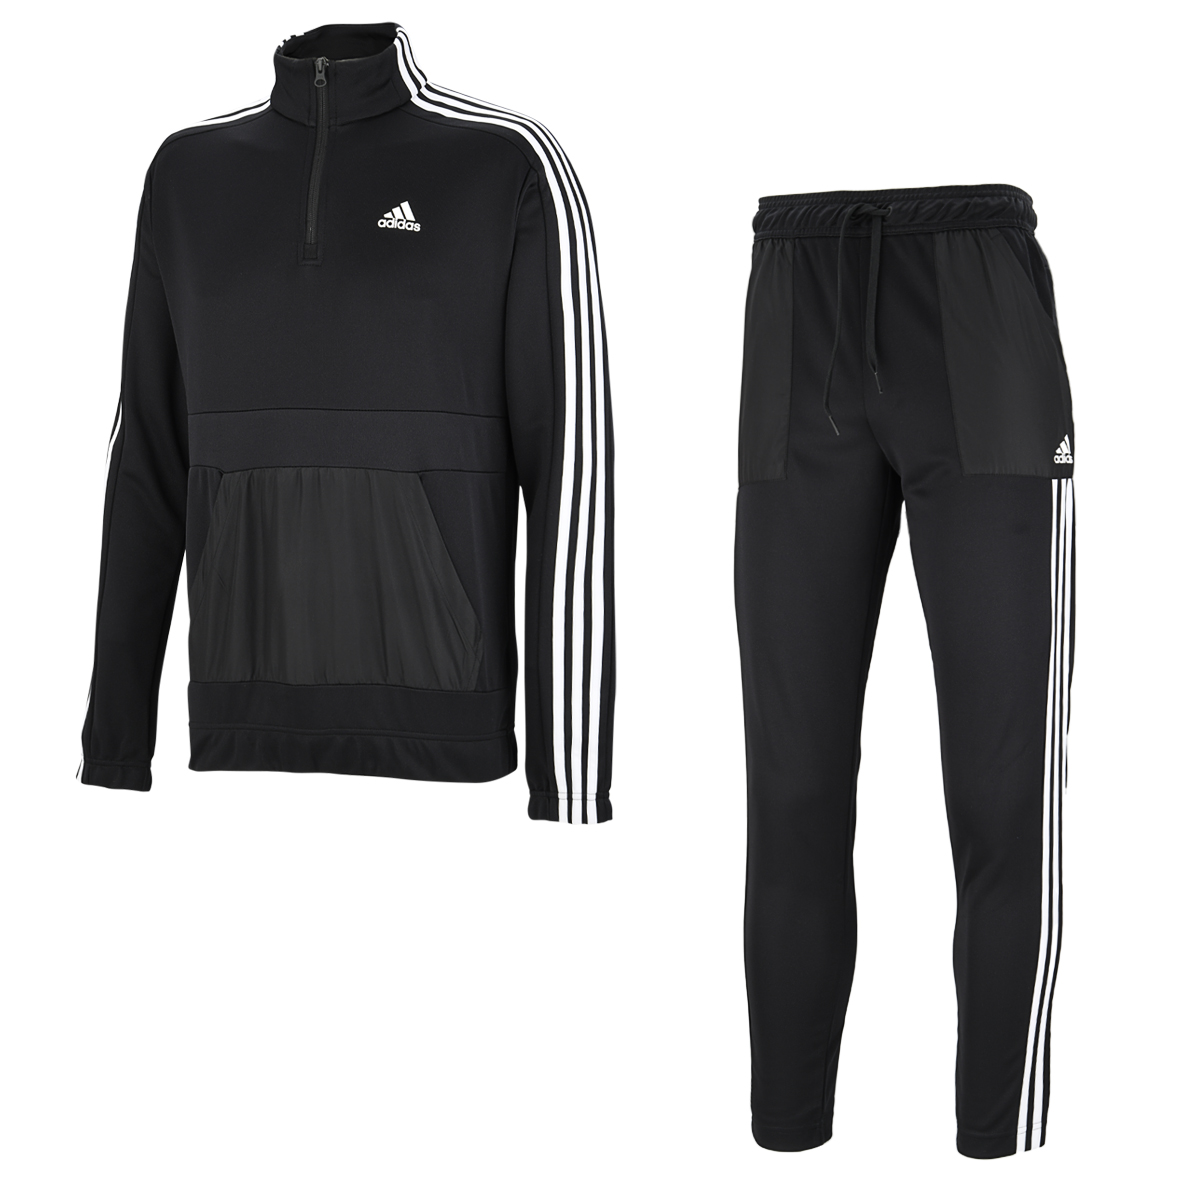 Conjunto adidas Tricot,  image number null